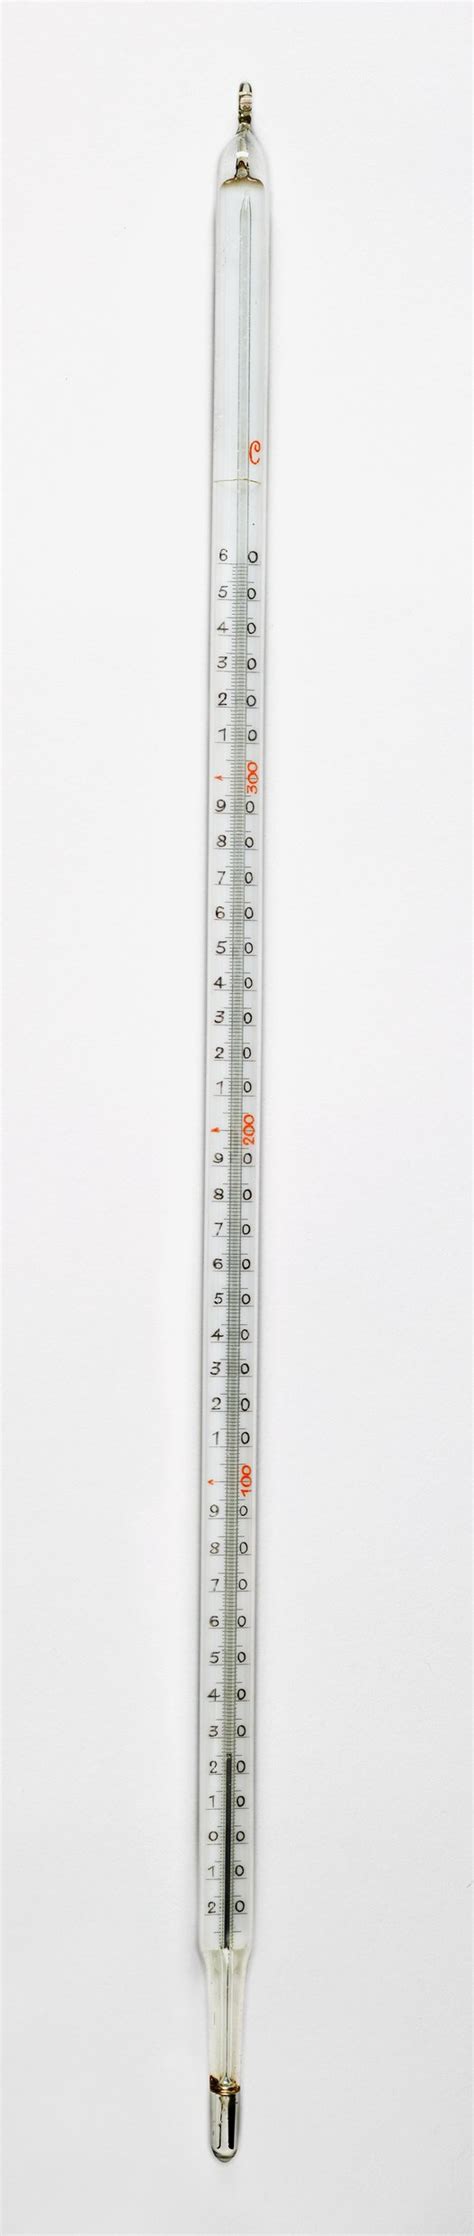 Mercury thermometer - Science History Institute Digital Collections